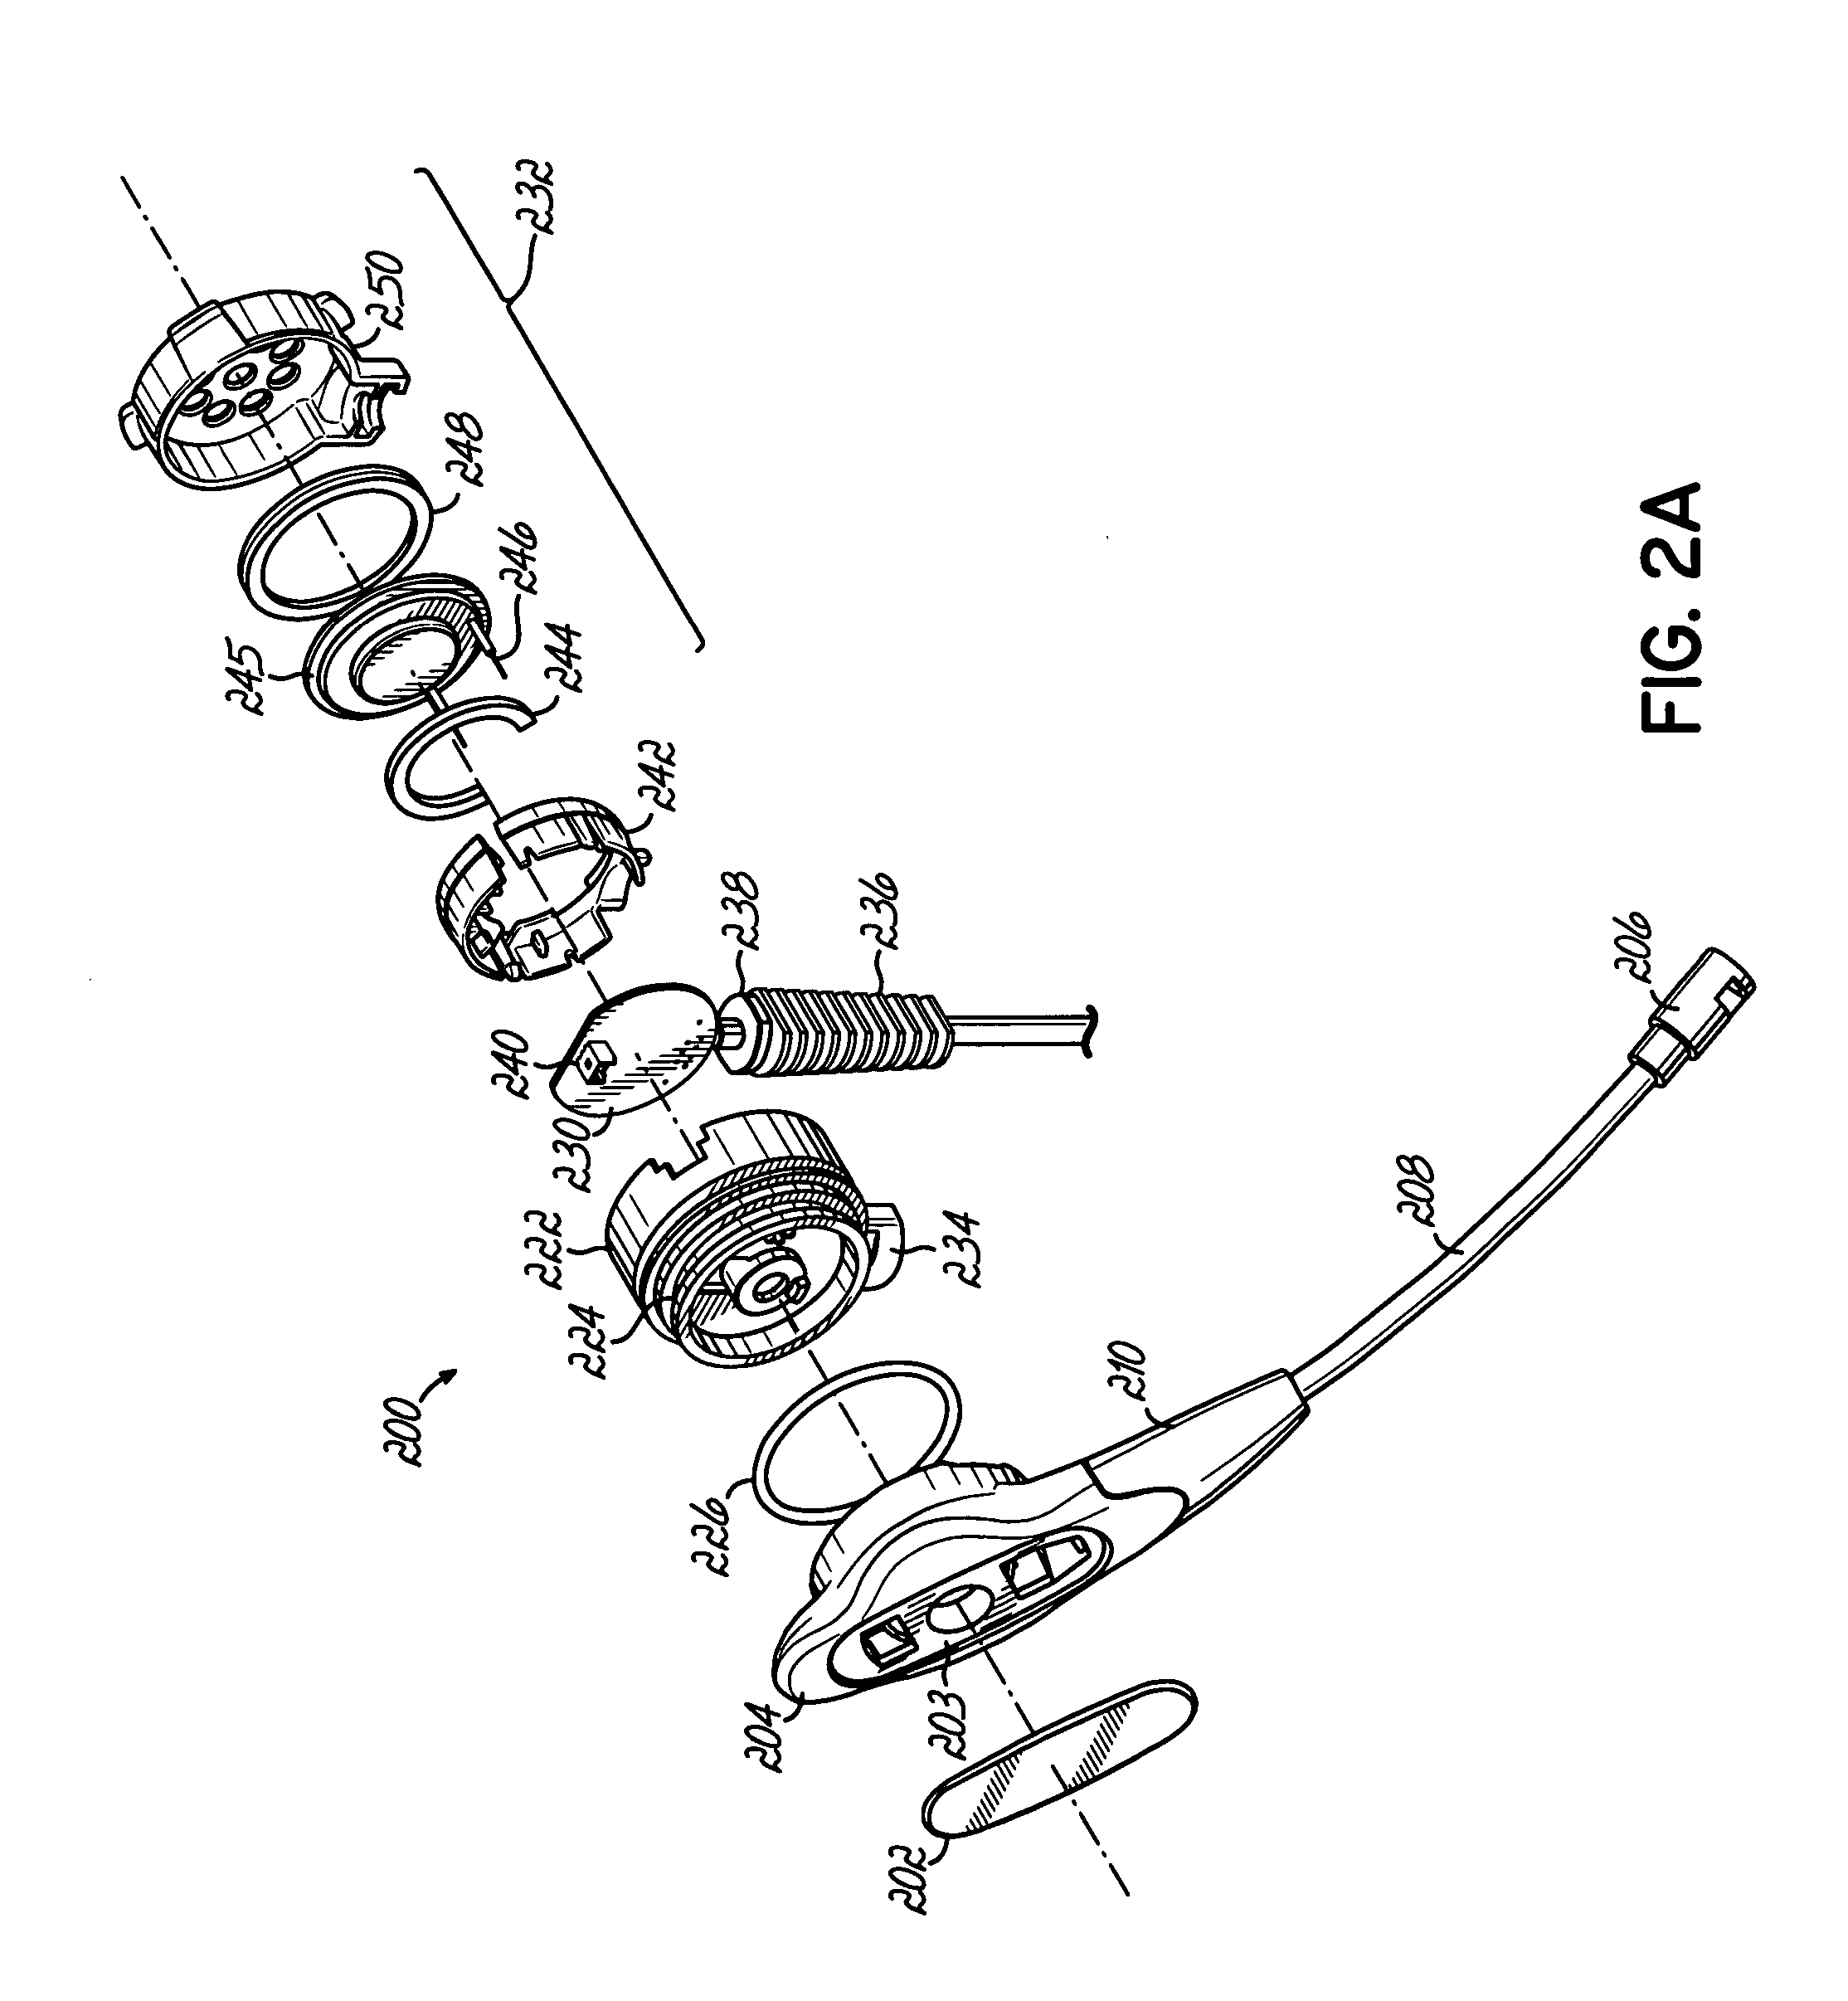 Method and system for an interchangeable headset module resistant to moisture infiltration